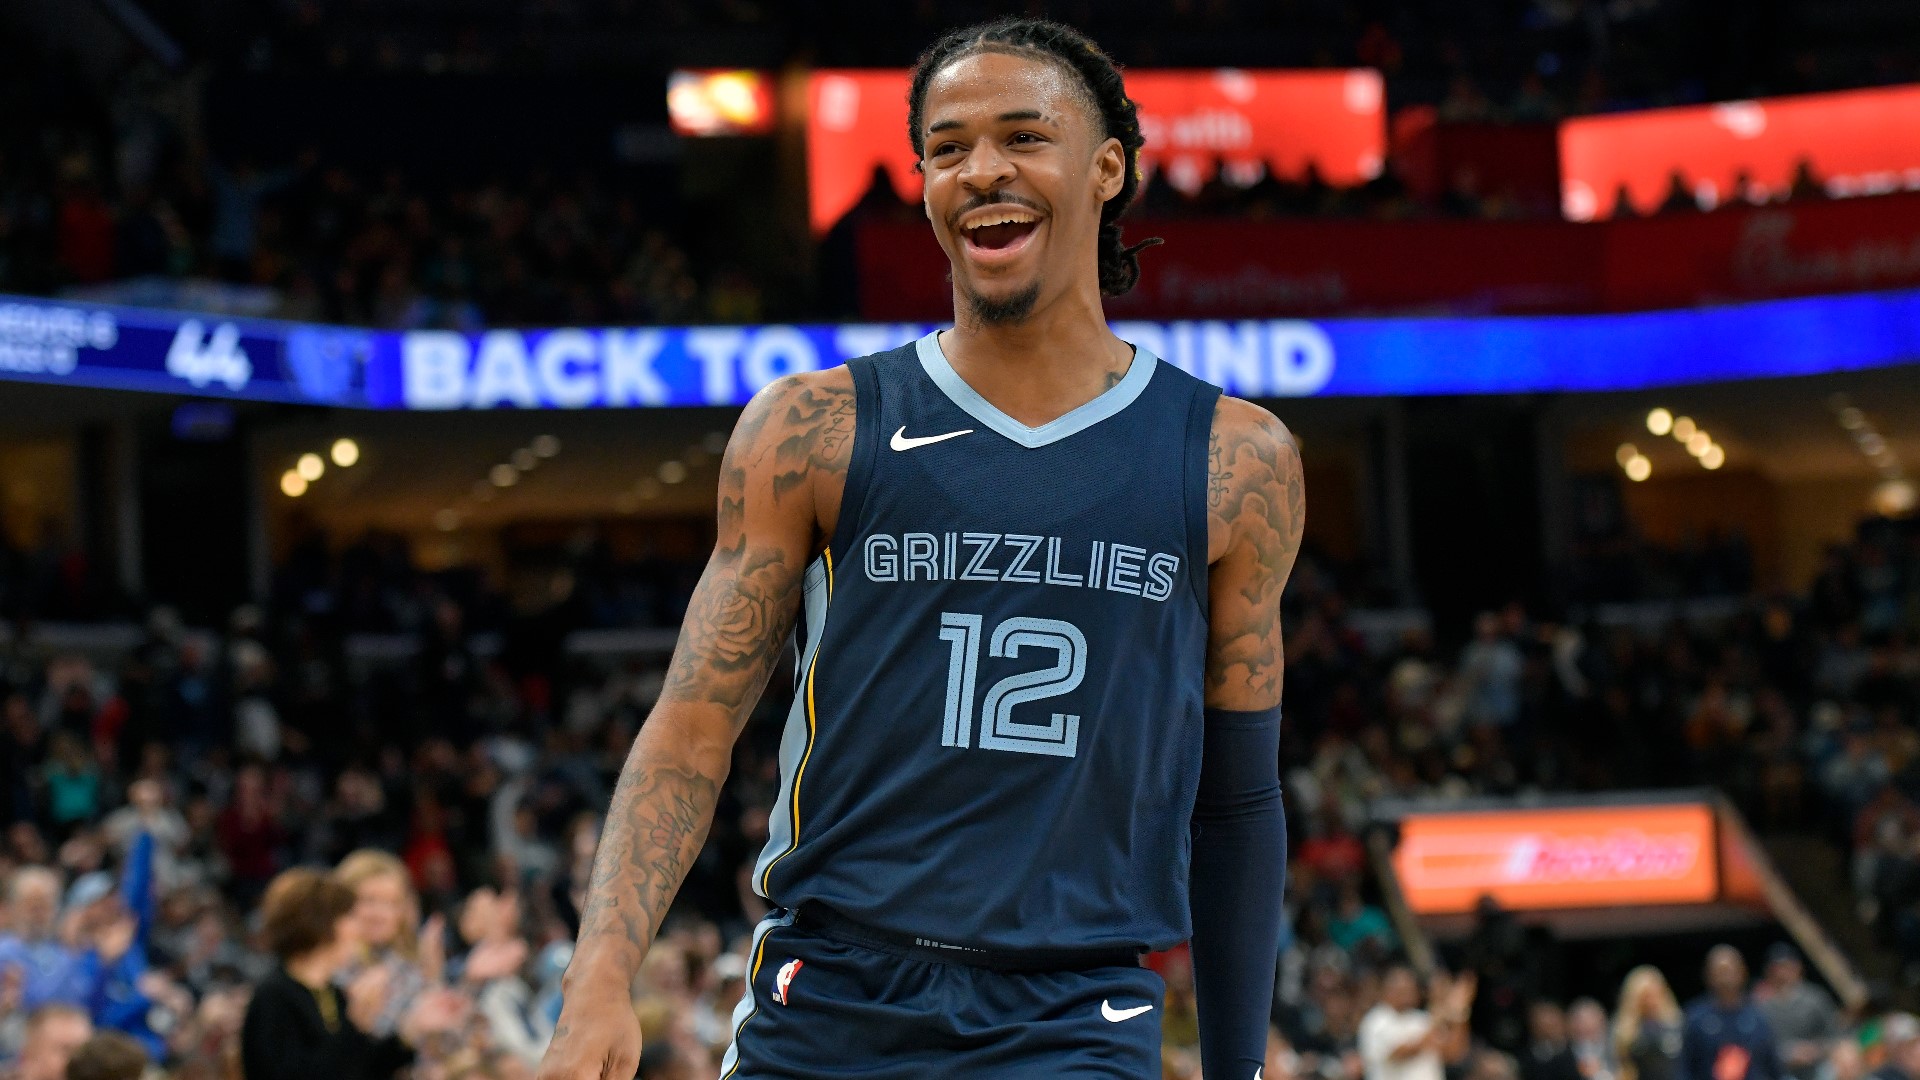 Ja Morant's alma mater announced on Saturday that the Grizzlies' star will be inducted into the hall of fame in the class of 2024.